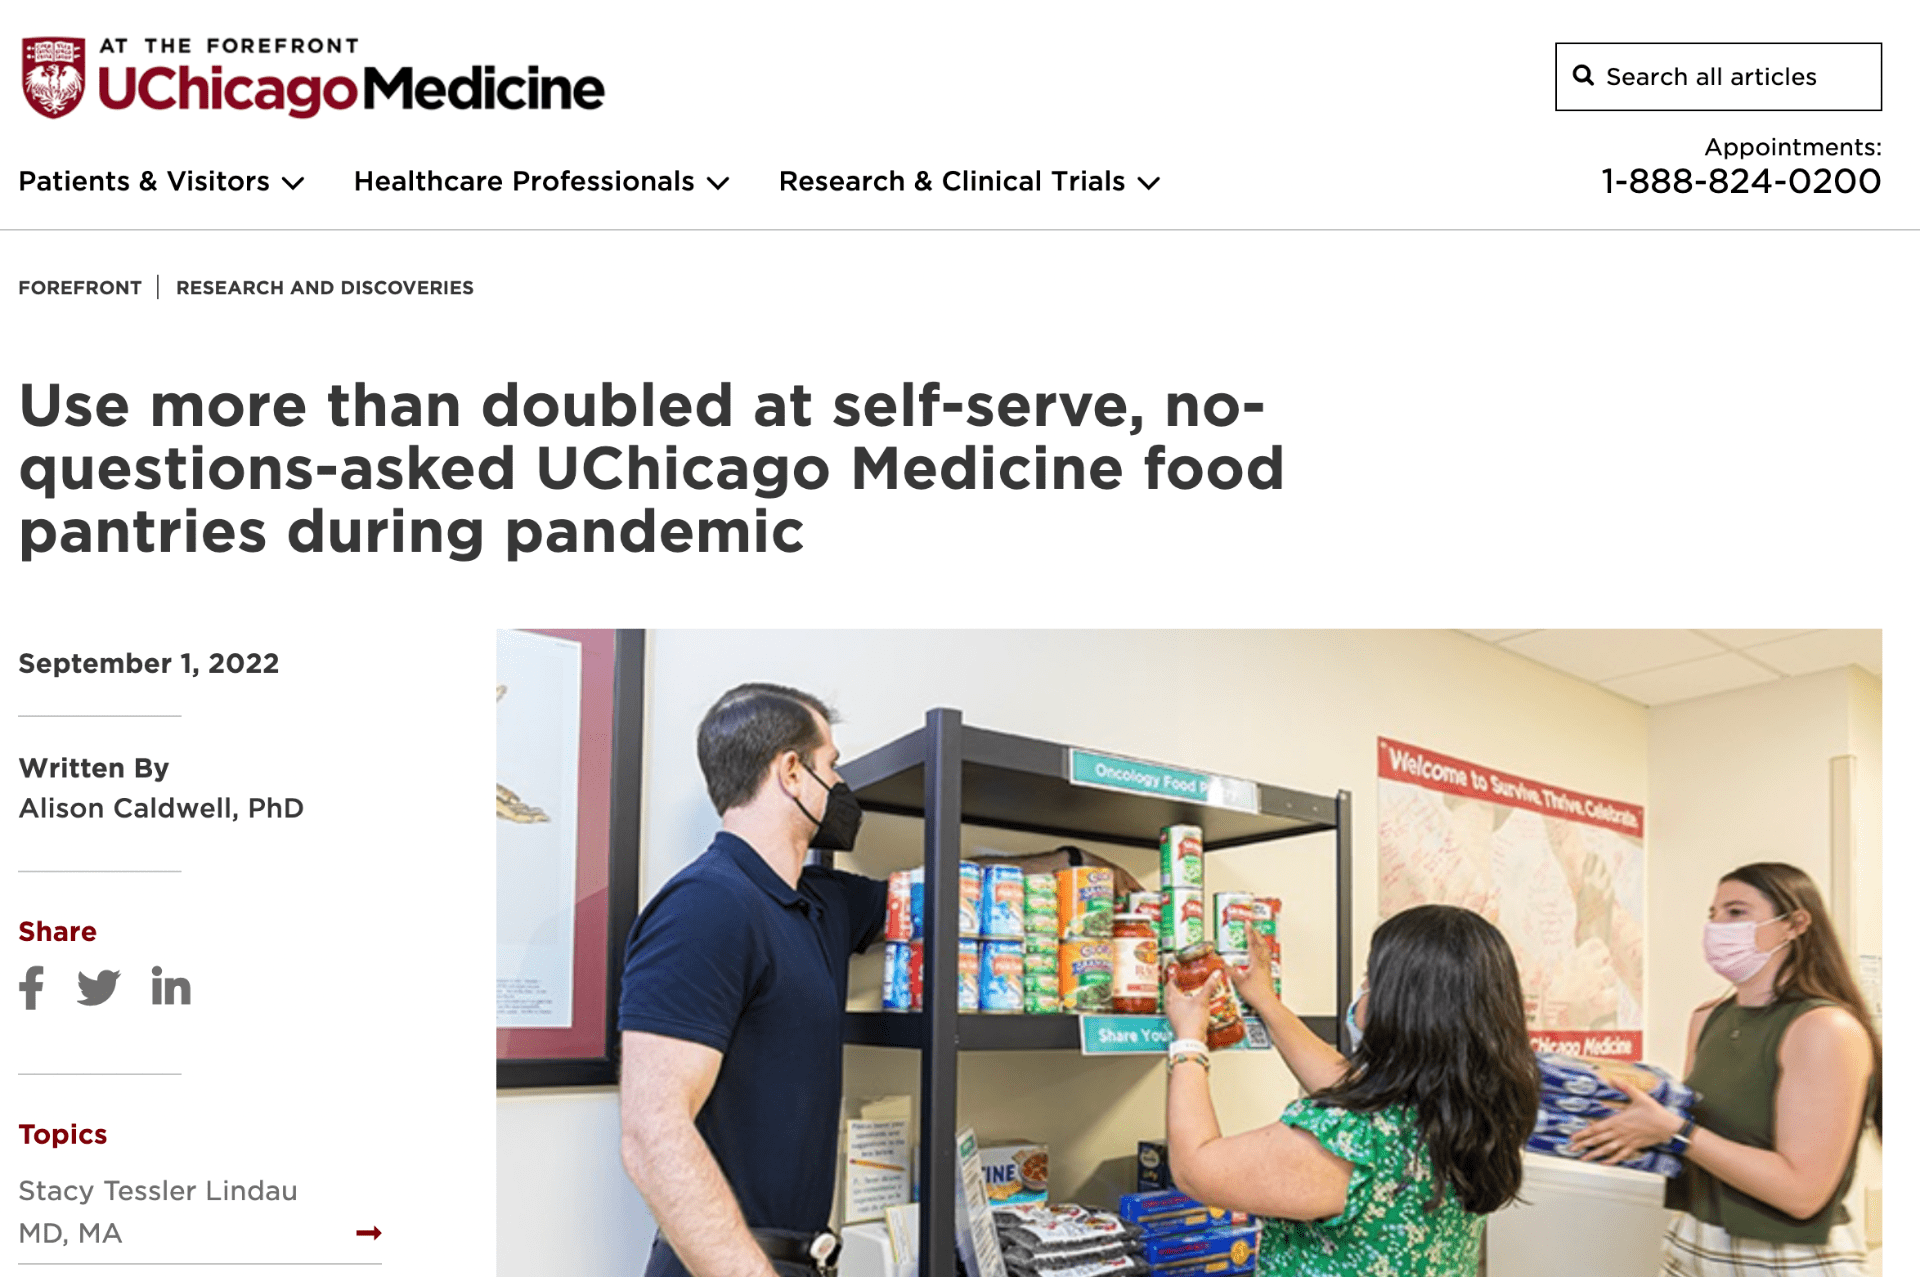 Use more than doubled at self-serve, no-questions-asked UChicago Medicine food pantries during pandemic